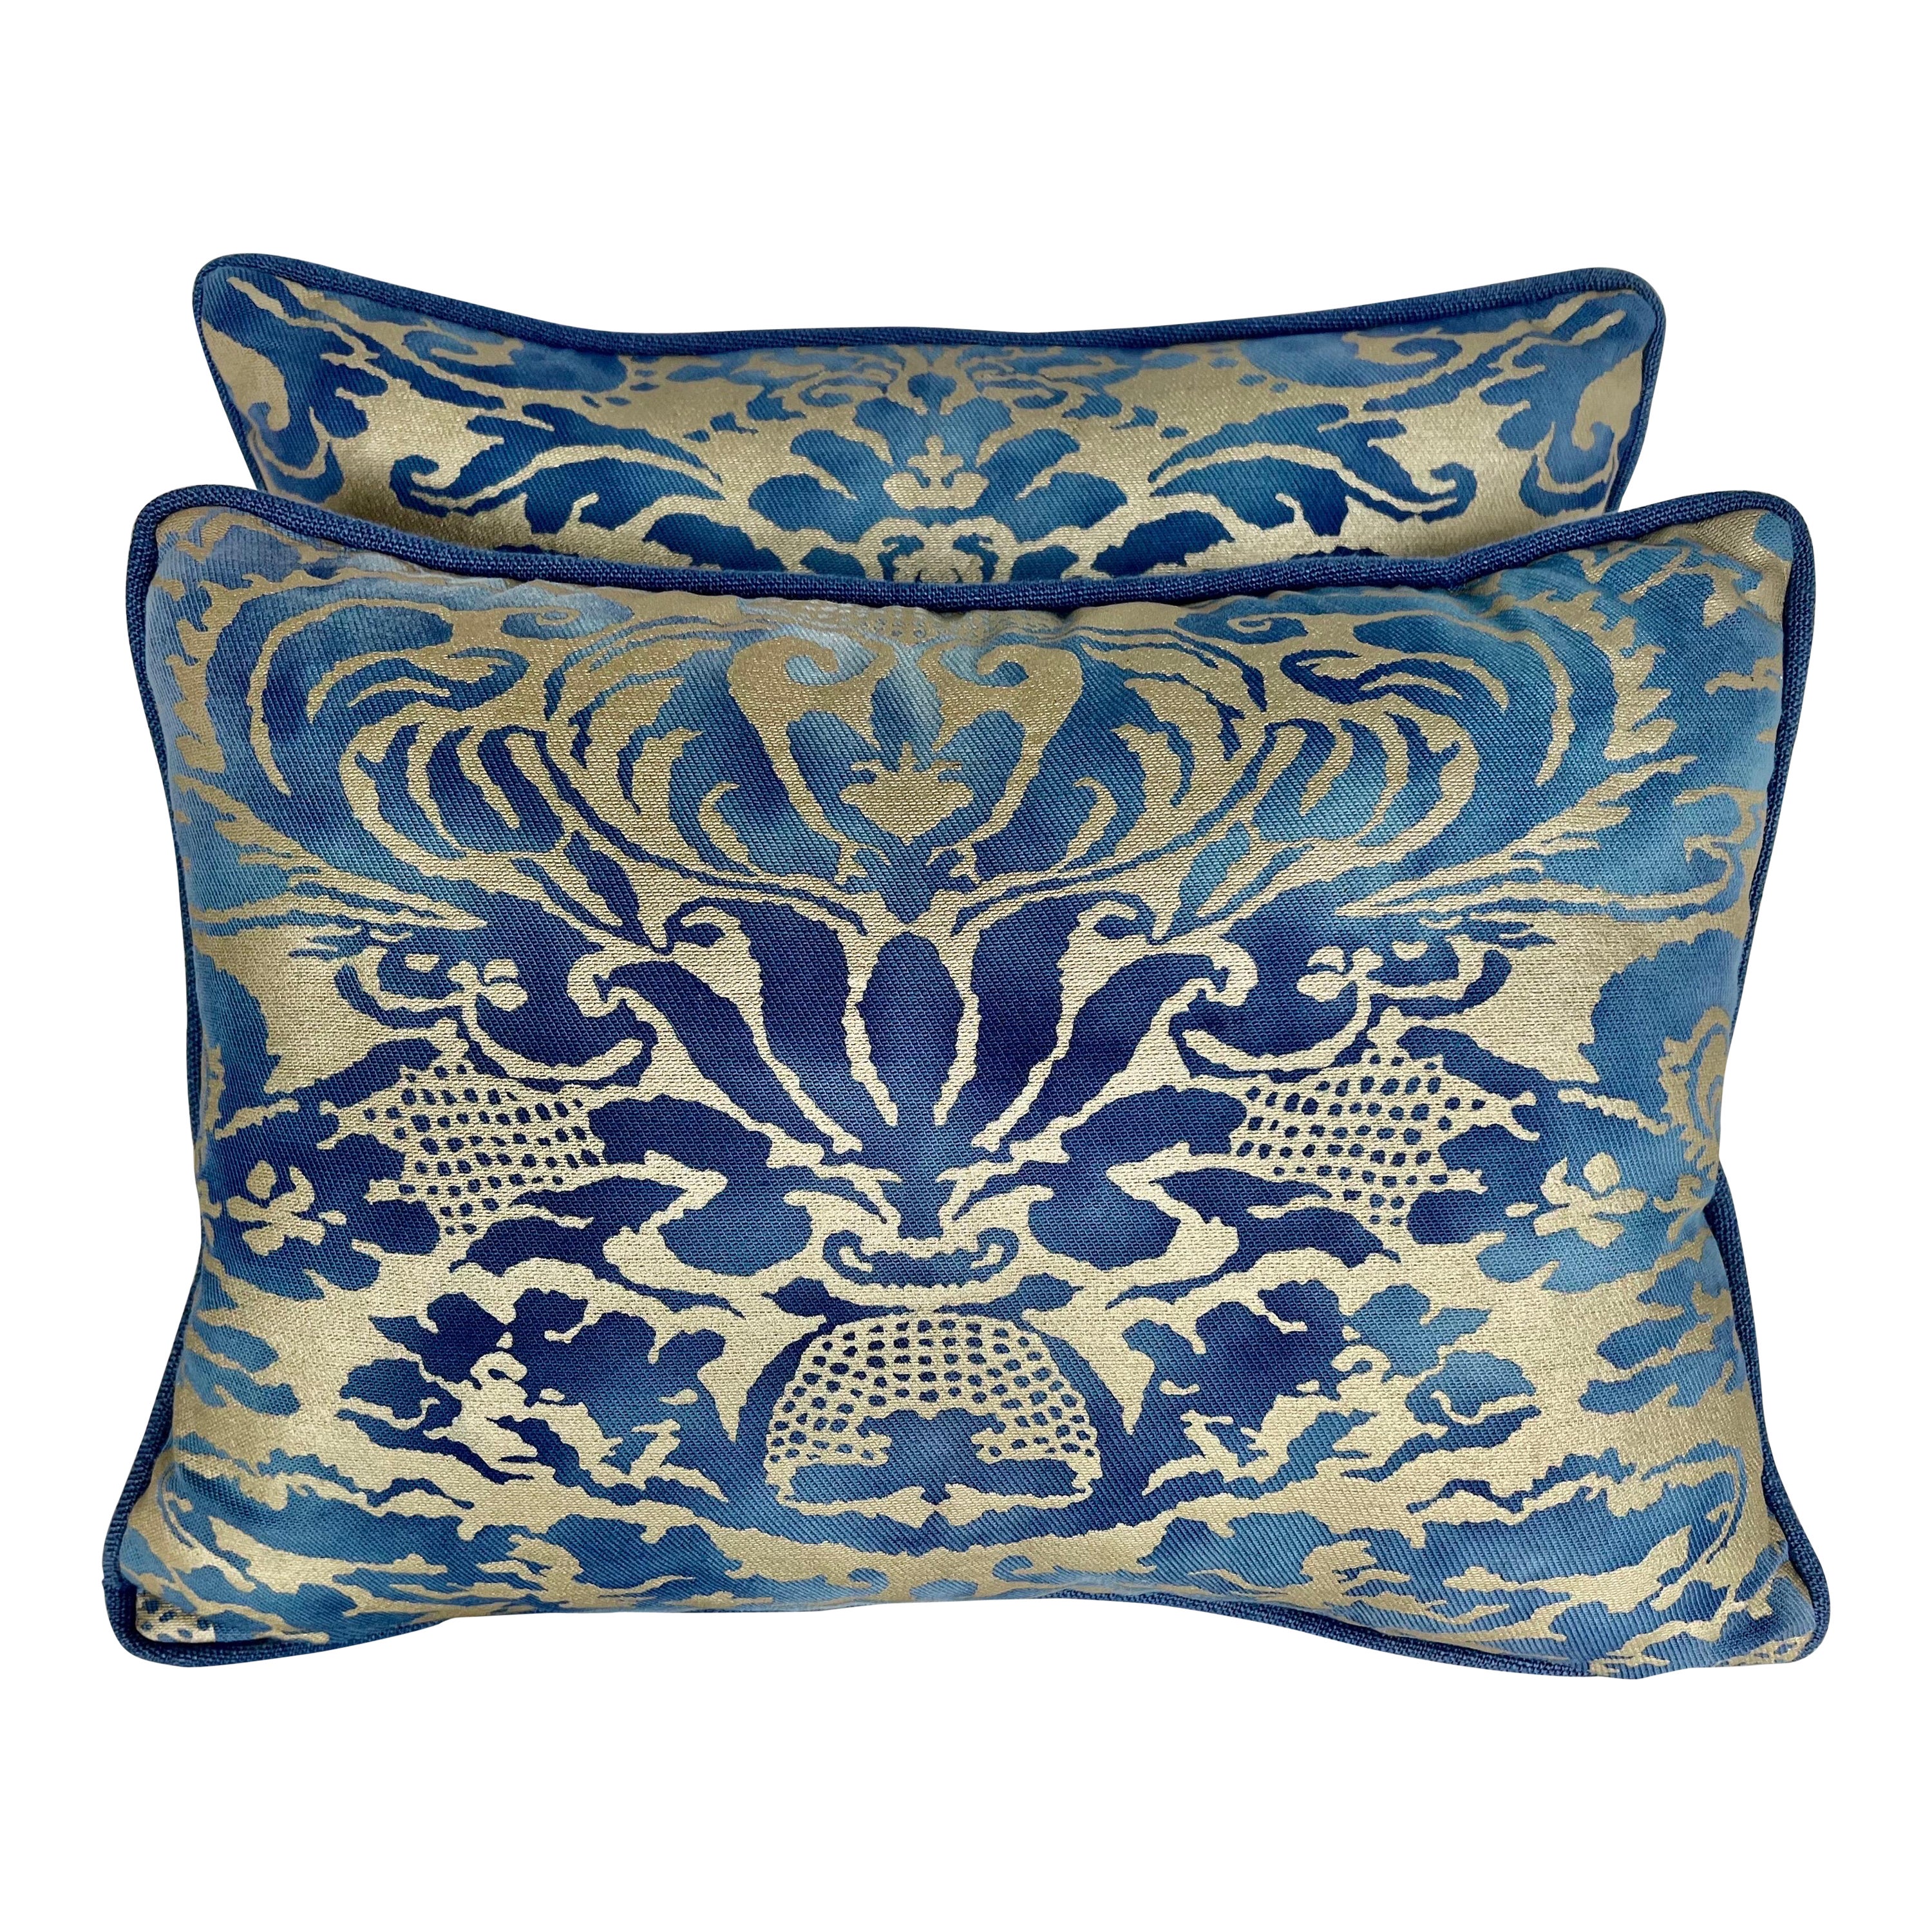 Pair of Corone Patterned Blue Fortuny Pillows